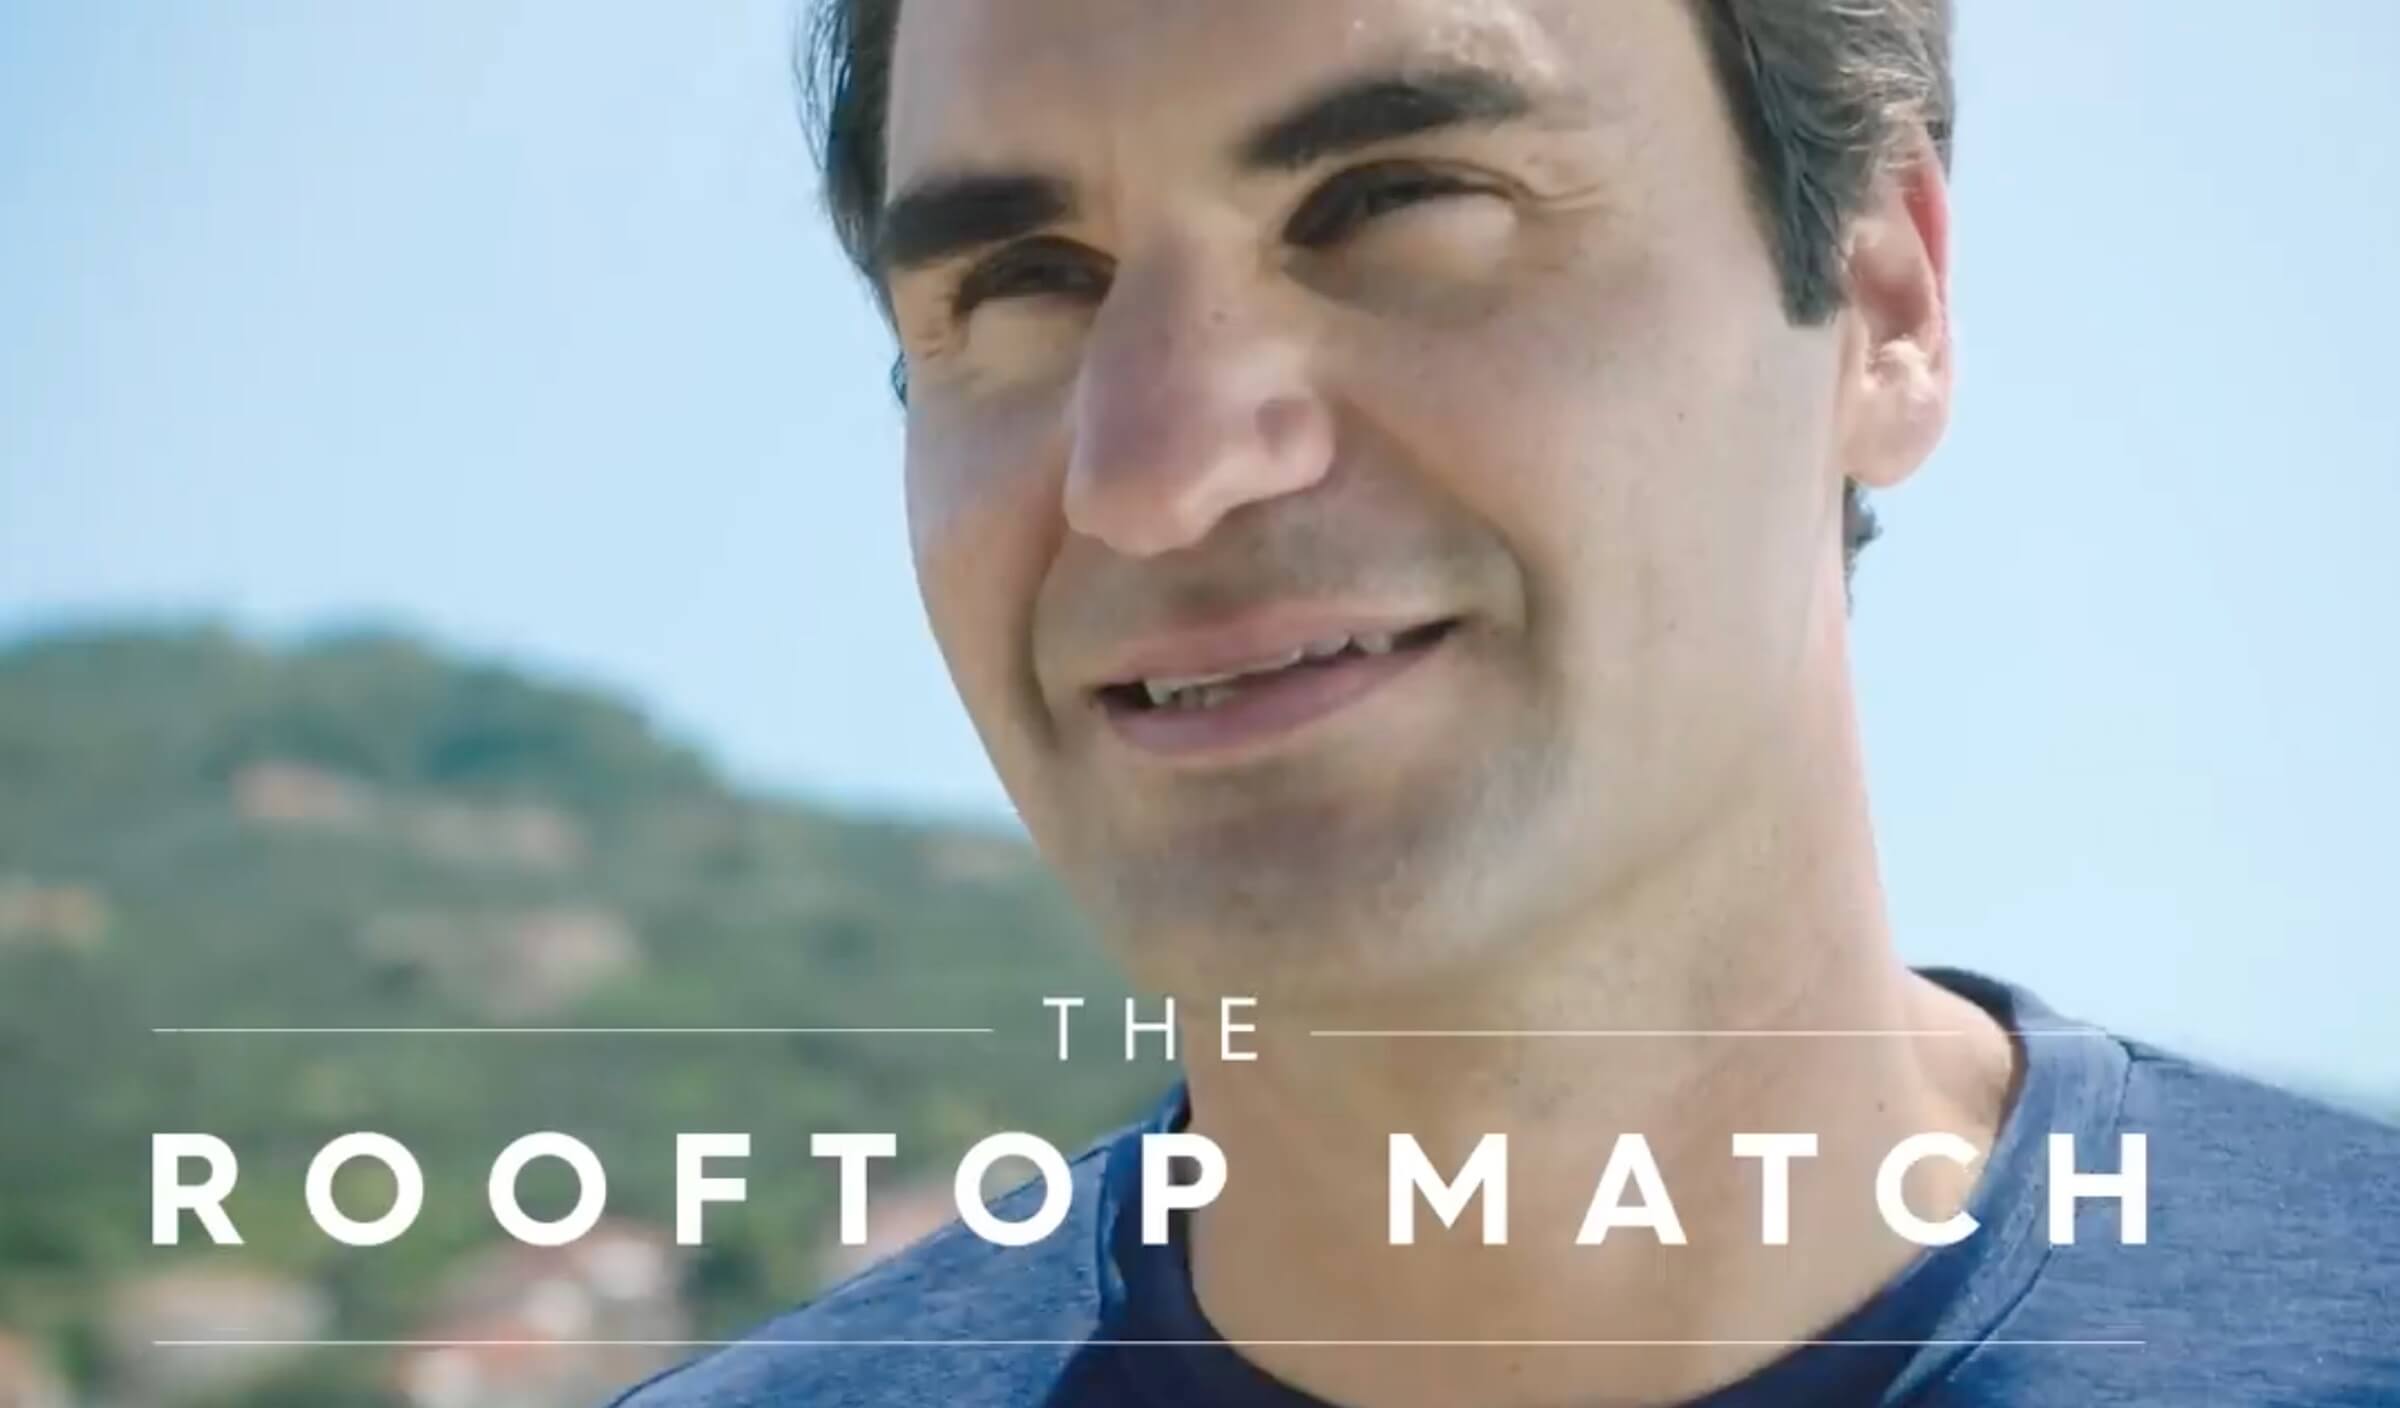 Barilla: The Rooftop Match with Roger Federer - Not your ordinary Tennis Match Radio LETI BIT Campaigns of the World®